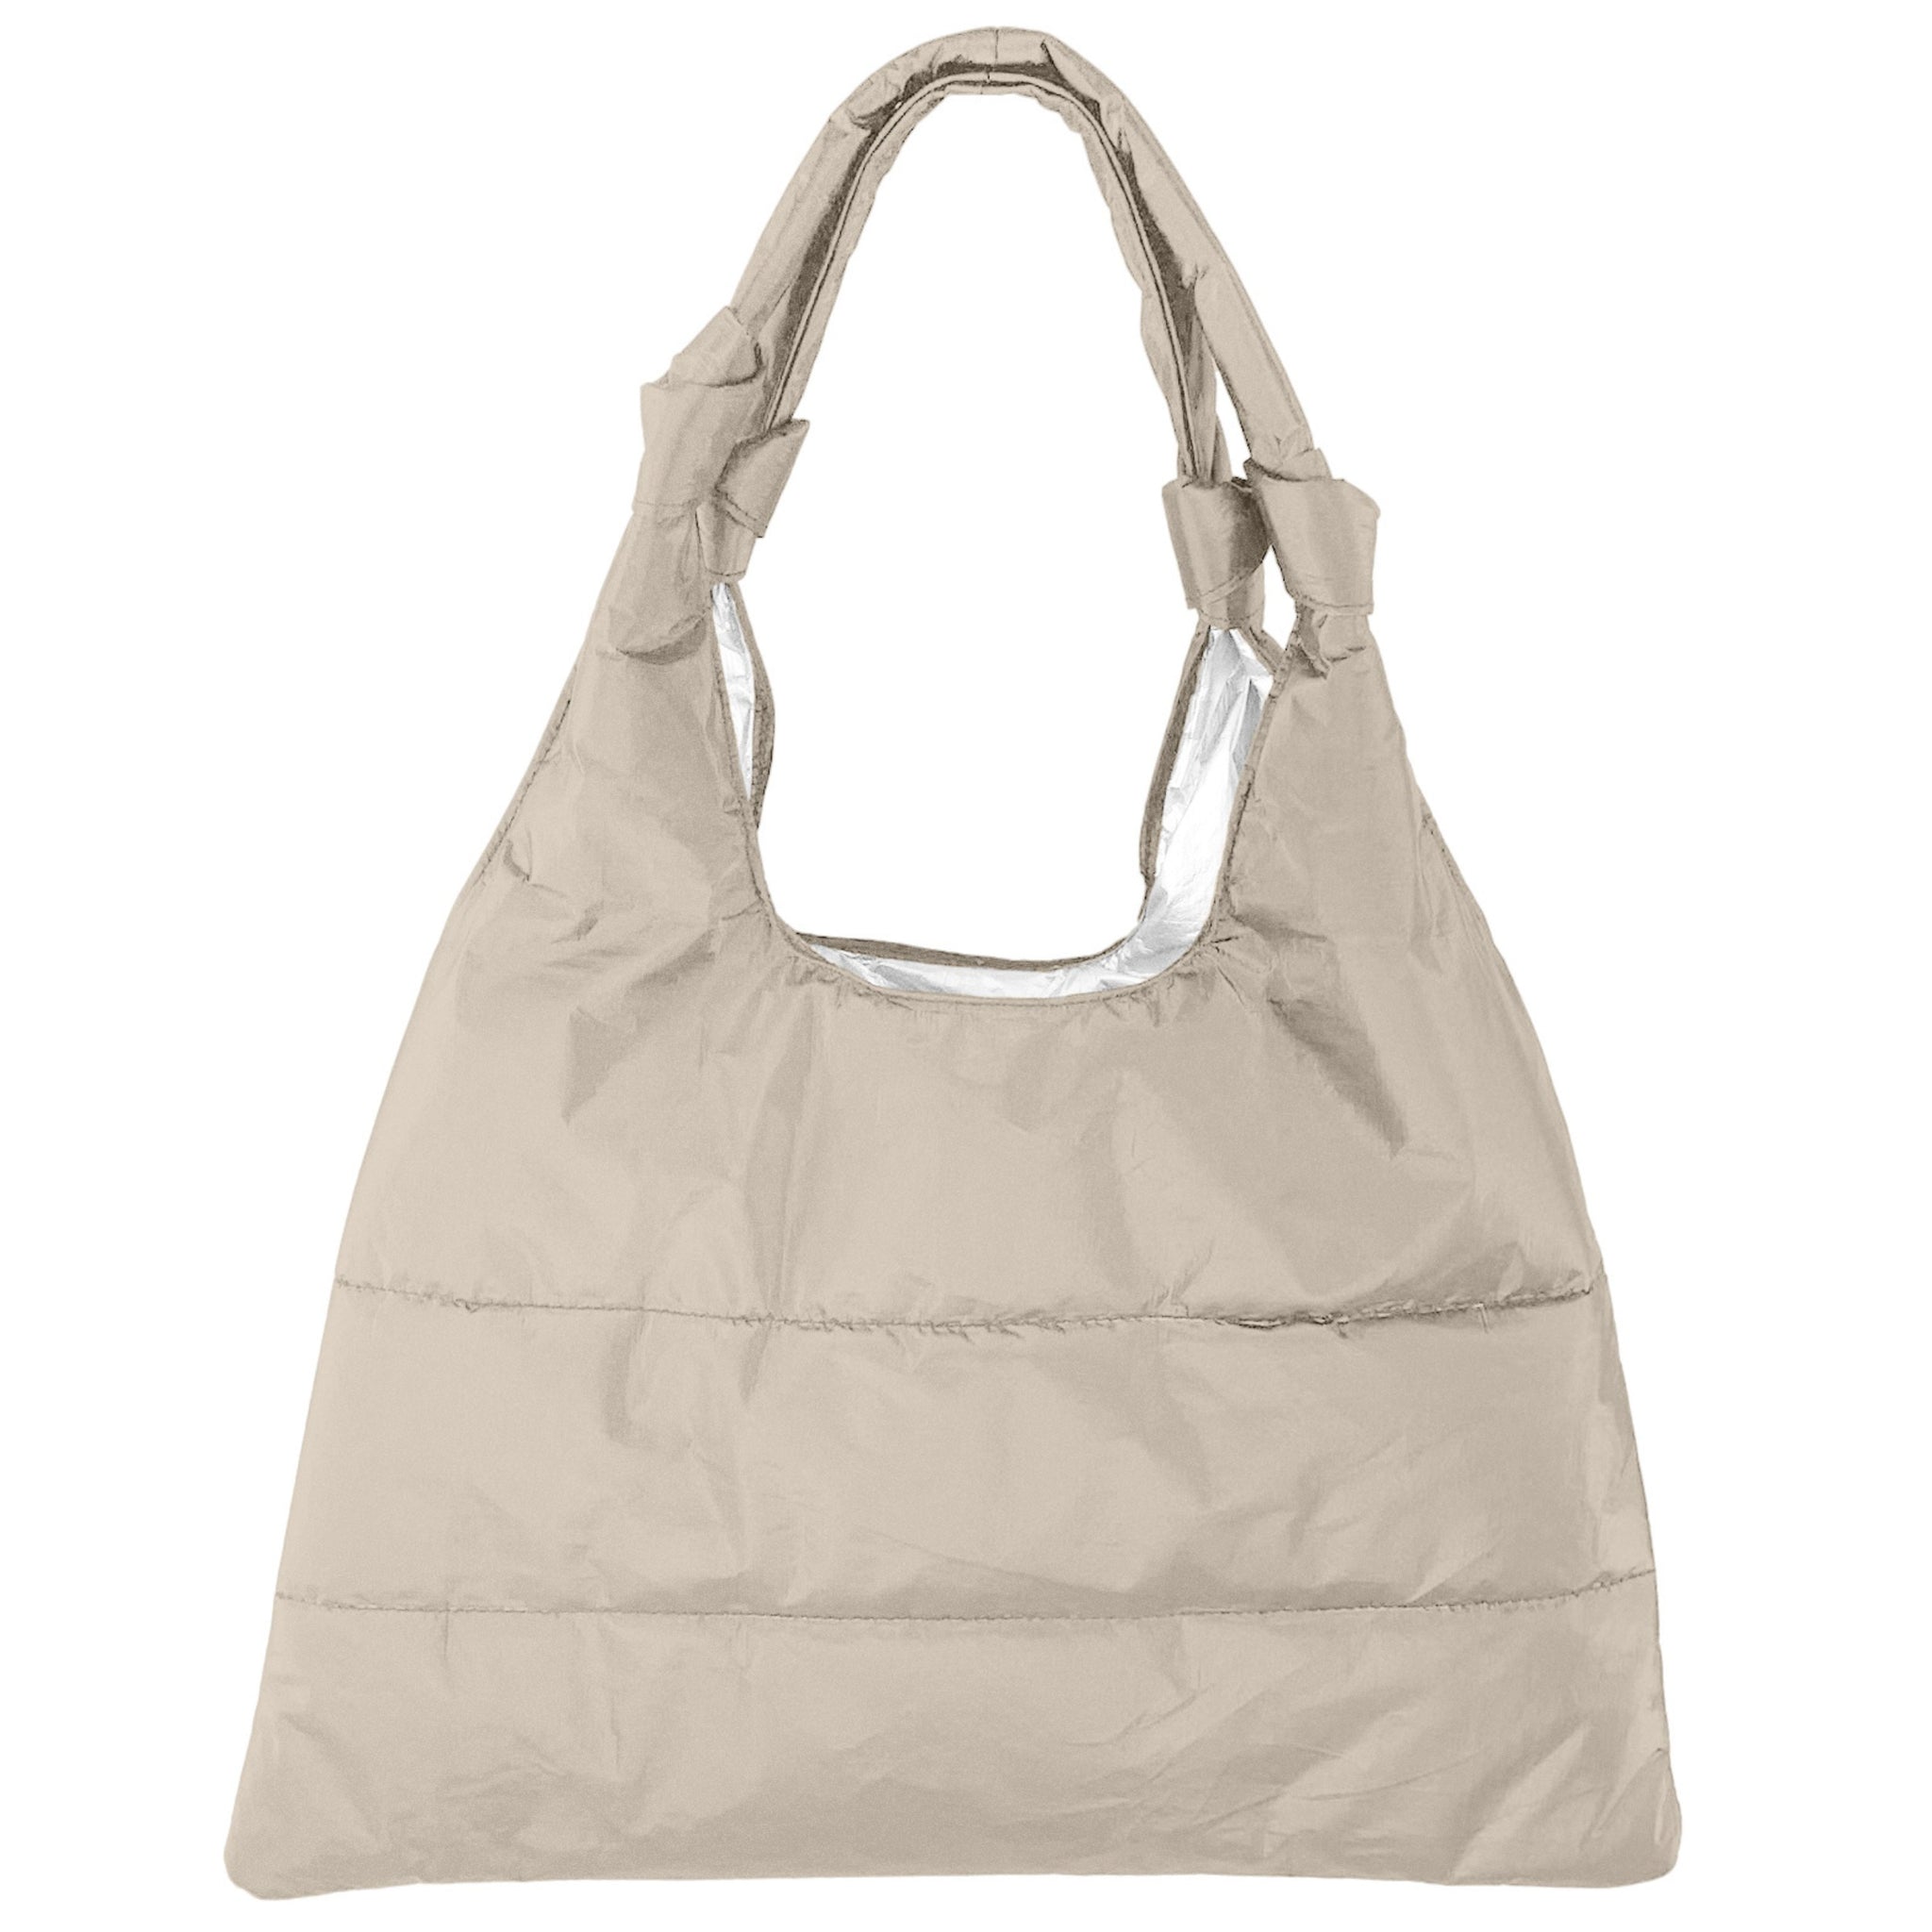 Love Me "Knot" Puffer Purse Tote in Shimmer Beige